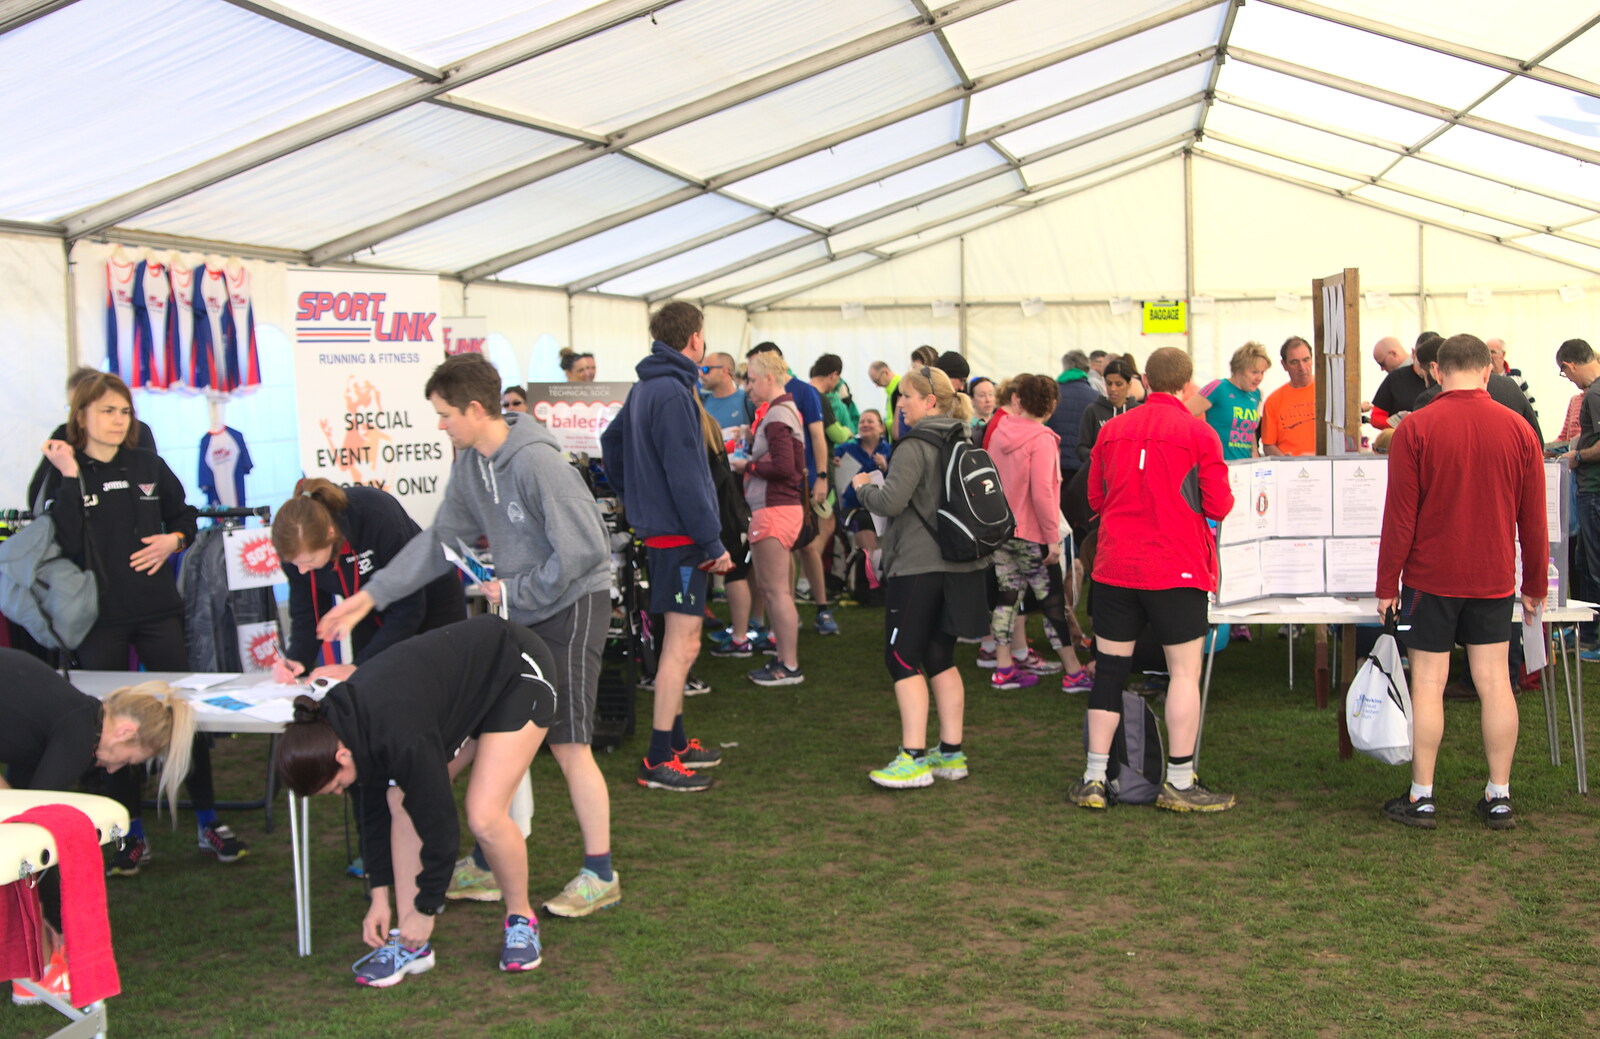 Inside the race marquee from The Black Dog Festival of Running, Bungay, Suffolk - 2nd April 2017